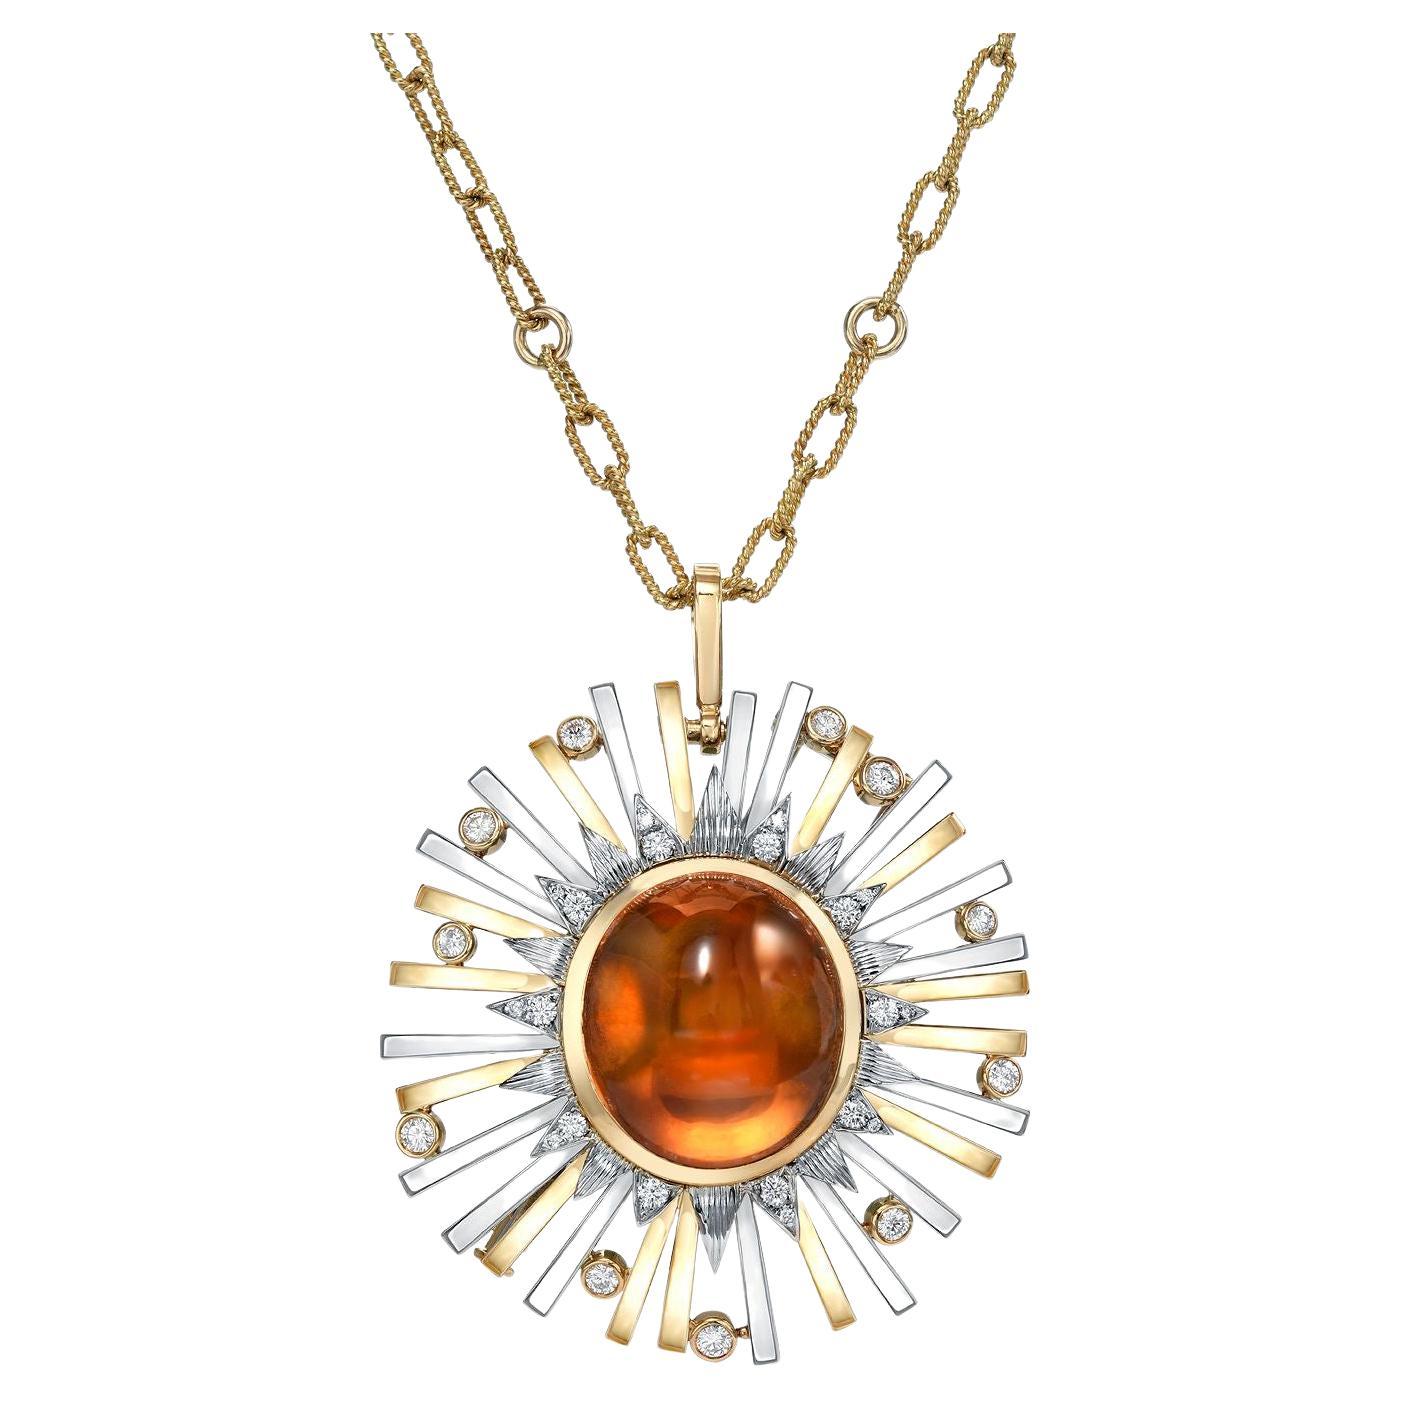 Highly prized 24.14 carat Madeira Citrine Cabochon, set in a one-of-a-kind, state of the art, convertible pendant necklace and brooch, adorned by a total of 0.86 carats of diamonds. 
Crafted by extremely skilled hands in 18K yellow and white